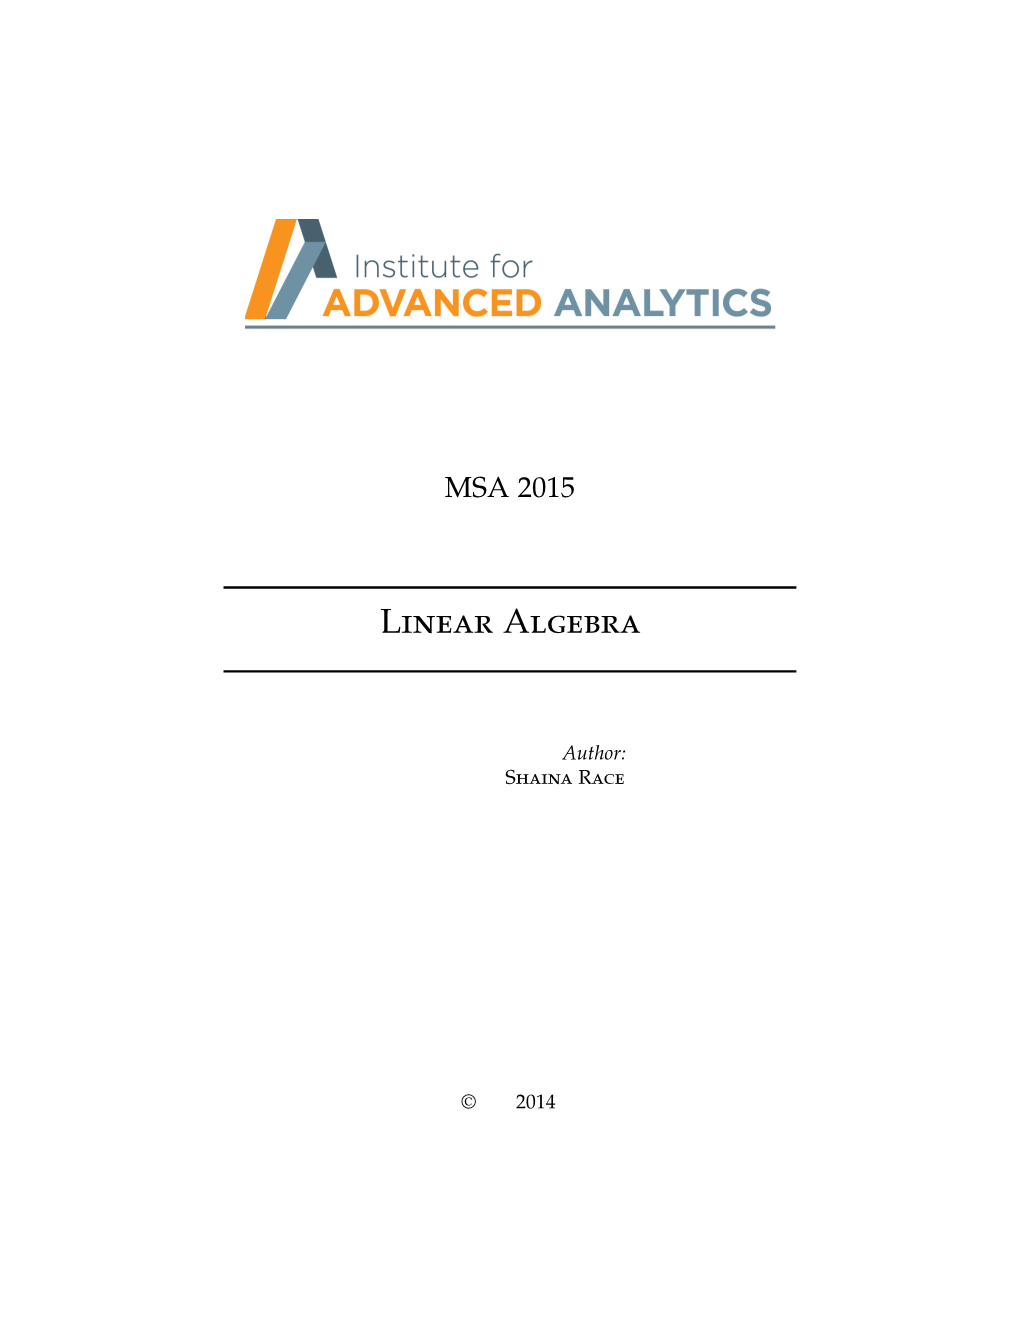 Linear Algebra Has Some Conventional Ways of Representing Certain Types of Numerical Objects